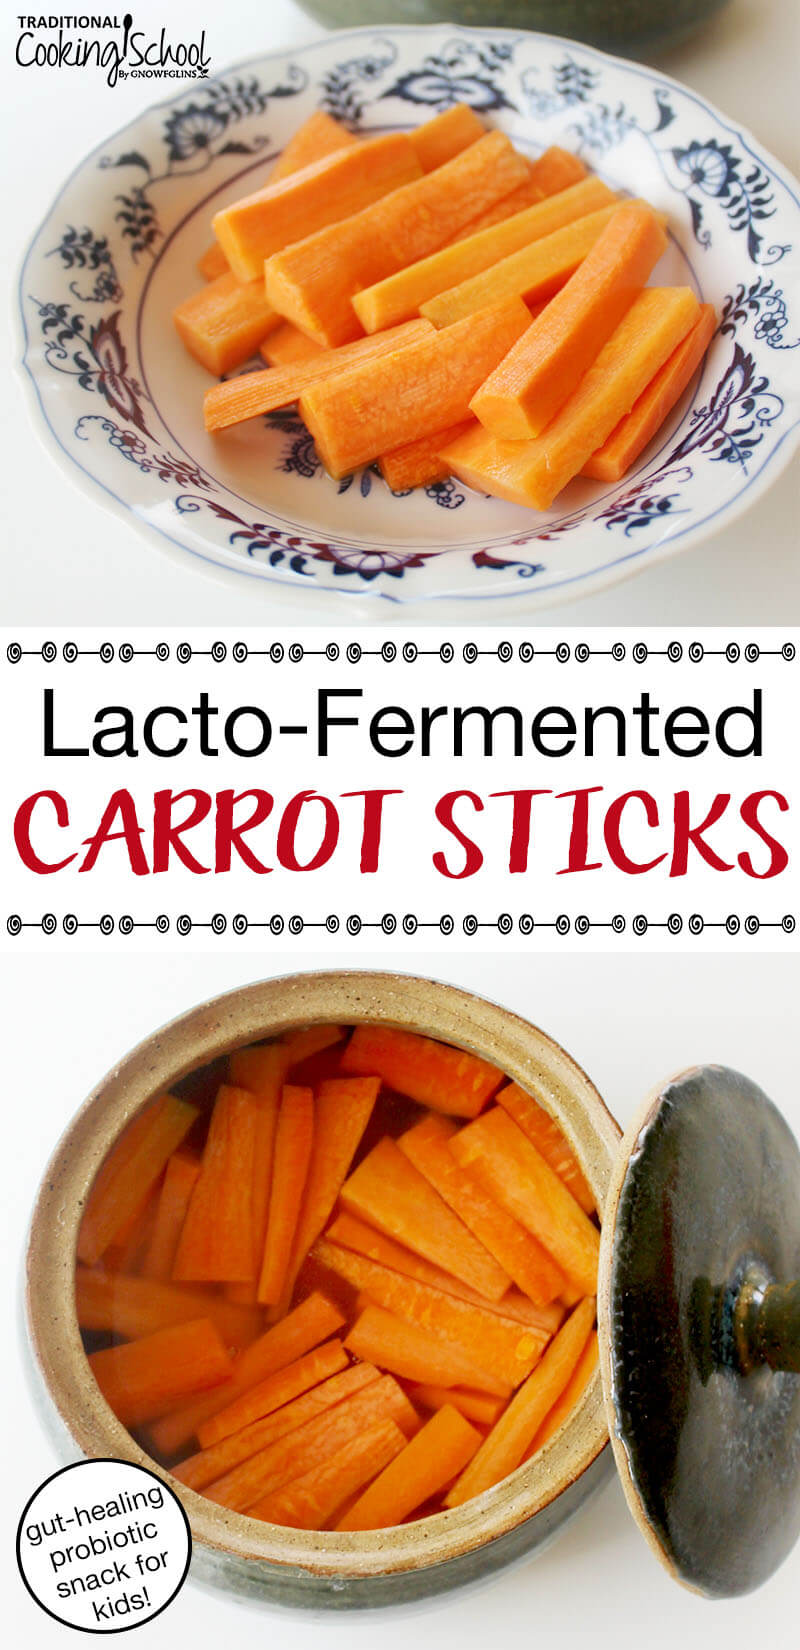 photo collage of carrot sticks and a crock where fermentation will occur with the addition of sea salt and water; with text overlay: "Lacto-Fermented Carrot Sticks (gut-healing probiotic snack for kids!)"